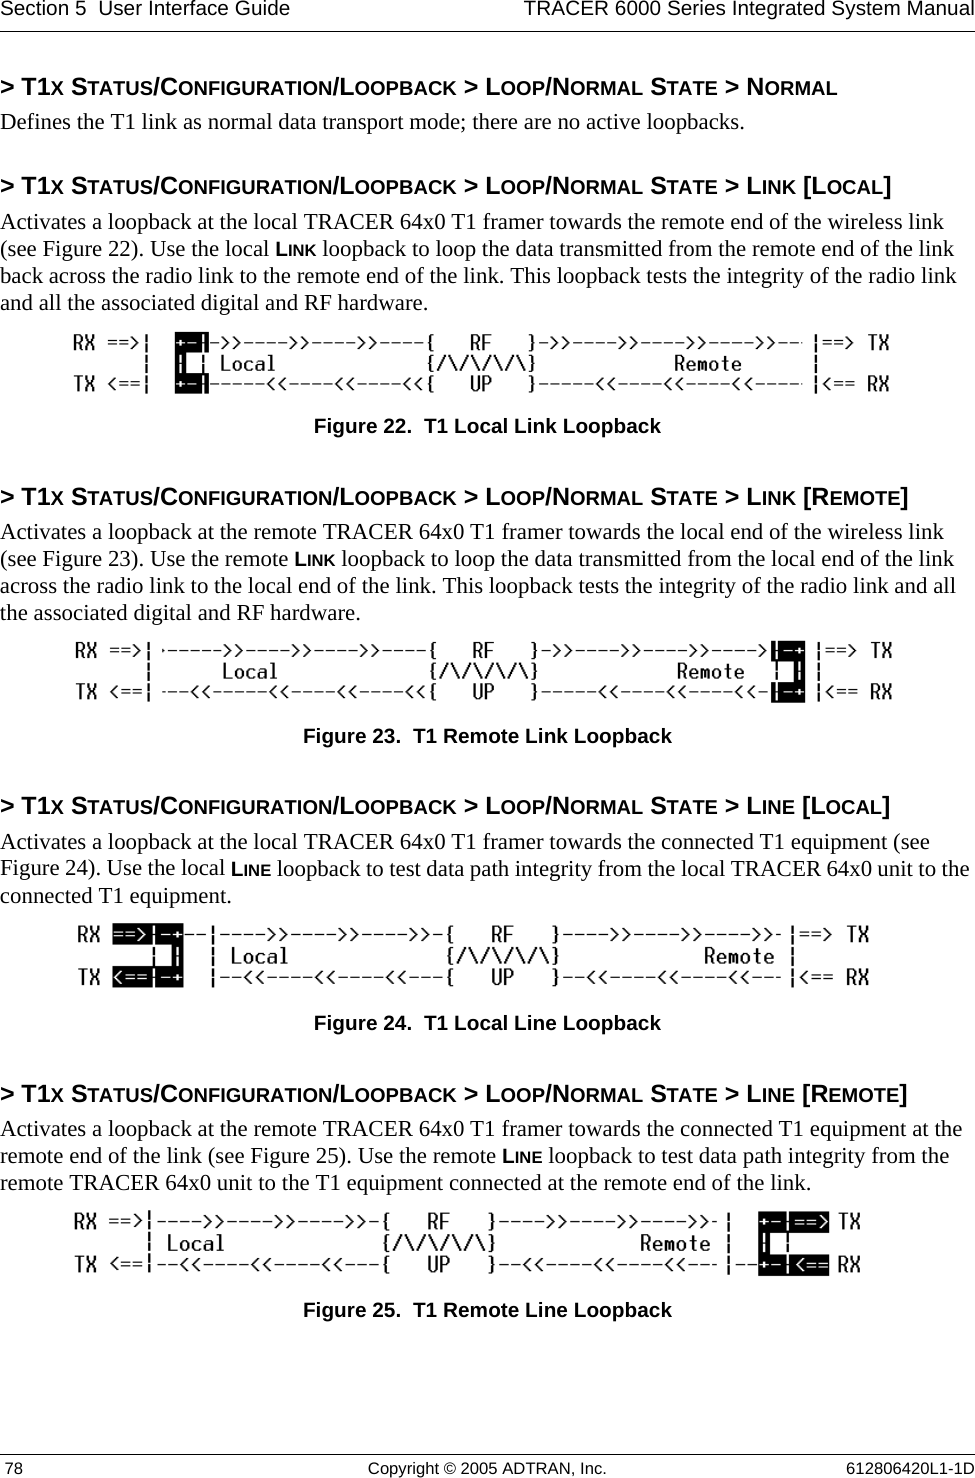 Section 5  User Interface Guide TRACER 6000 Series Integrated System Manual 78 Copyright © 2005 ADTRAN, Inc. 612806420L1-1D&gt; T1X STATUS/CONFIGURATION/LOOPBACK &gt; LOOP/NORMAL STATE &gt; NORMALDefines the T1 link as normal data transport mode; there are no active loopbacks.&gt; T1X STATUS/CONFIGURATION/LOOPBACK &gt; LOOP/NORMAL STATE &gt; LINK [LOCAL]Activates a loopback at the local TRACER 64x0 T1 framer towards the remote end of the wireless link (see Figure 22). Use the local LINK loopback to loop the data transmitted from the remote end of the link back across the radio link to the remote end of the link. This loopback tests the integrity of the radio link and all the associated digital and RF hardware.Figure 22.  T1 Local Link Loopback&gt; T1X STATUS/CONFIGURATION/LOOPBACK &gt; LOOP/NORMAL STATE &gt; LINK [REMOTE]Activates a loopback at the remote TRACER 64x0 T1 framer towards the local end of the wireless link (see Figure 23). Use the remote LINK loopback to loop the data transmitted from the local end of the link across the radio link to the local end of the link. This loopback tests the integrity of the radio link and all the associated digital and RF hardware.Figure 23.  T1 Remote Link Loopback&gt; T1X STATUS/CONFIGURATION/LOOPBACK &gt; LOOP/NORMAL STATE &gt; LINE [LOCAL]Activates a loopback at the local TRACER 64x0 T1 framer towards the connected T1 equipment (see Figure 24). Use the local LINE loopback to test data path integrity from the local TRACER 64x0 unit to the connected T1 equipment.Figure 24.  T1 Local Line Loopback&gt; T1X STATUS/CONFIGURATION/LOOPBACK &gt; LOOP/NORMAL STATE &gt; LINE [REMOTE]Activates a loopback at the remote TRACER 64x0 T1 framer towards the connected T1 equipment at the remote end of the link (see Figure 25). Use the remote LINE loopback to test data path integrity from the remote TRACER 64x0 unit to the T1 equipment connected at the remote end of the link.Figure 25.  T1 Remote Line Loopback